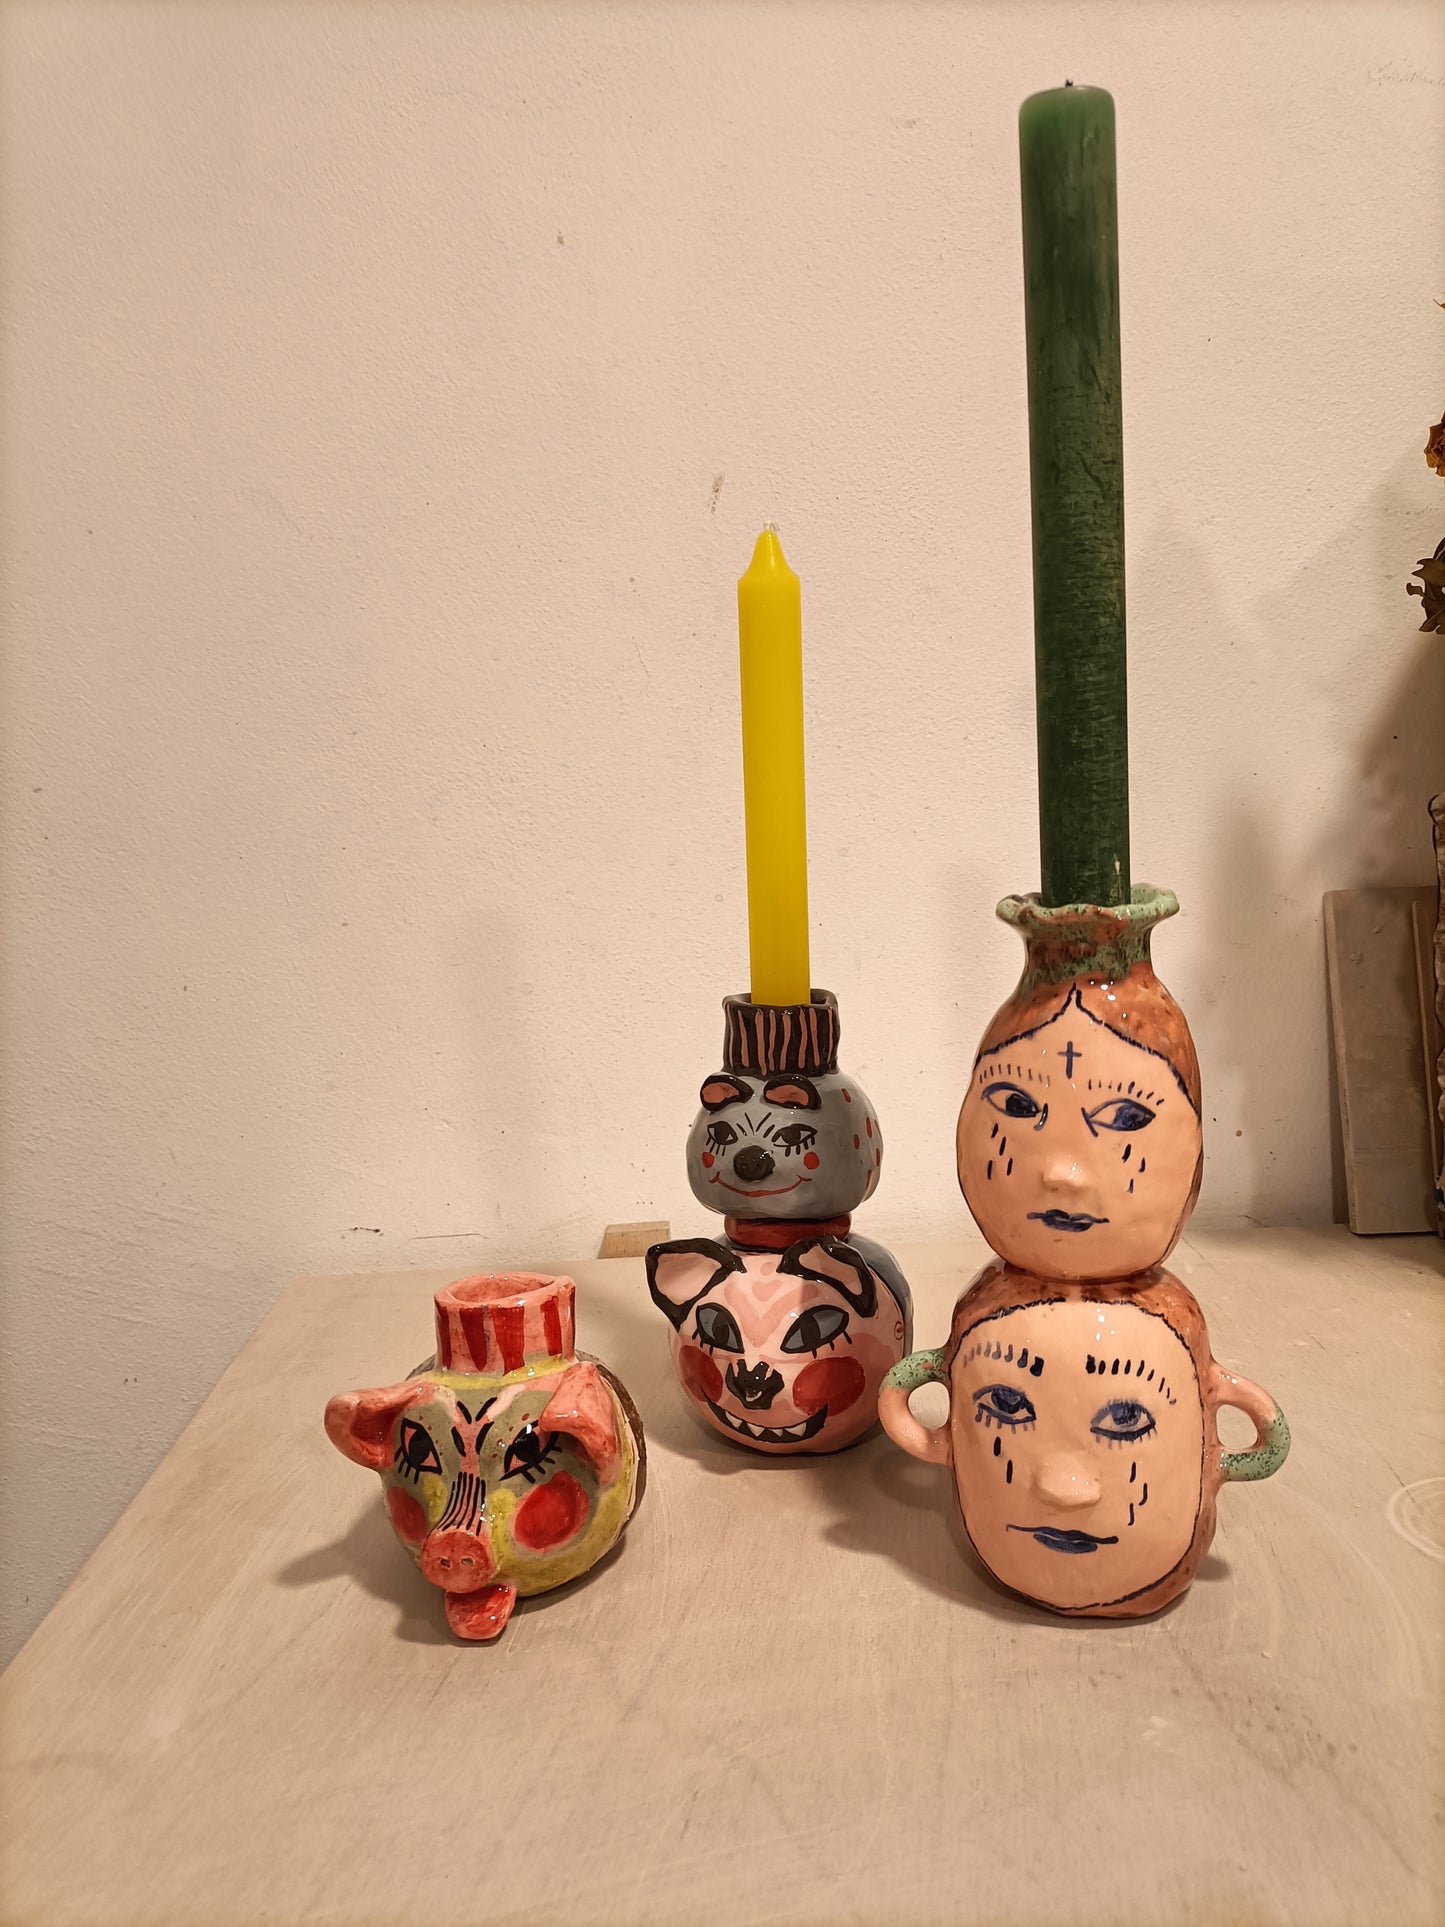 Brunch and Ceramics Workshop with Julia in Lisbon, Portugal by subcultours